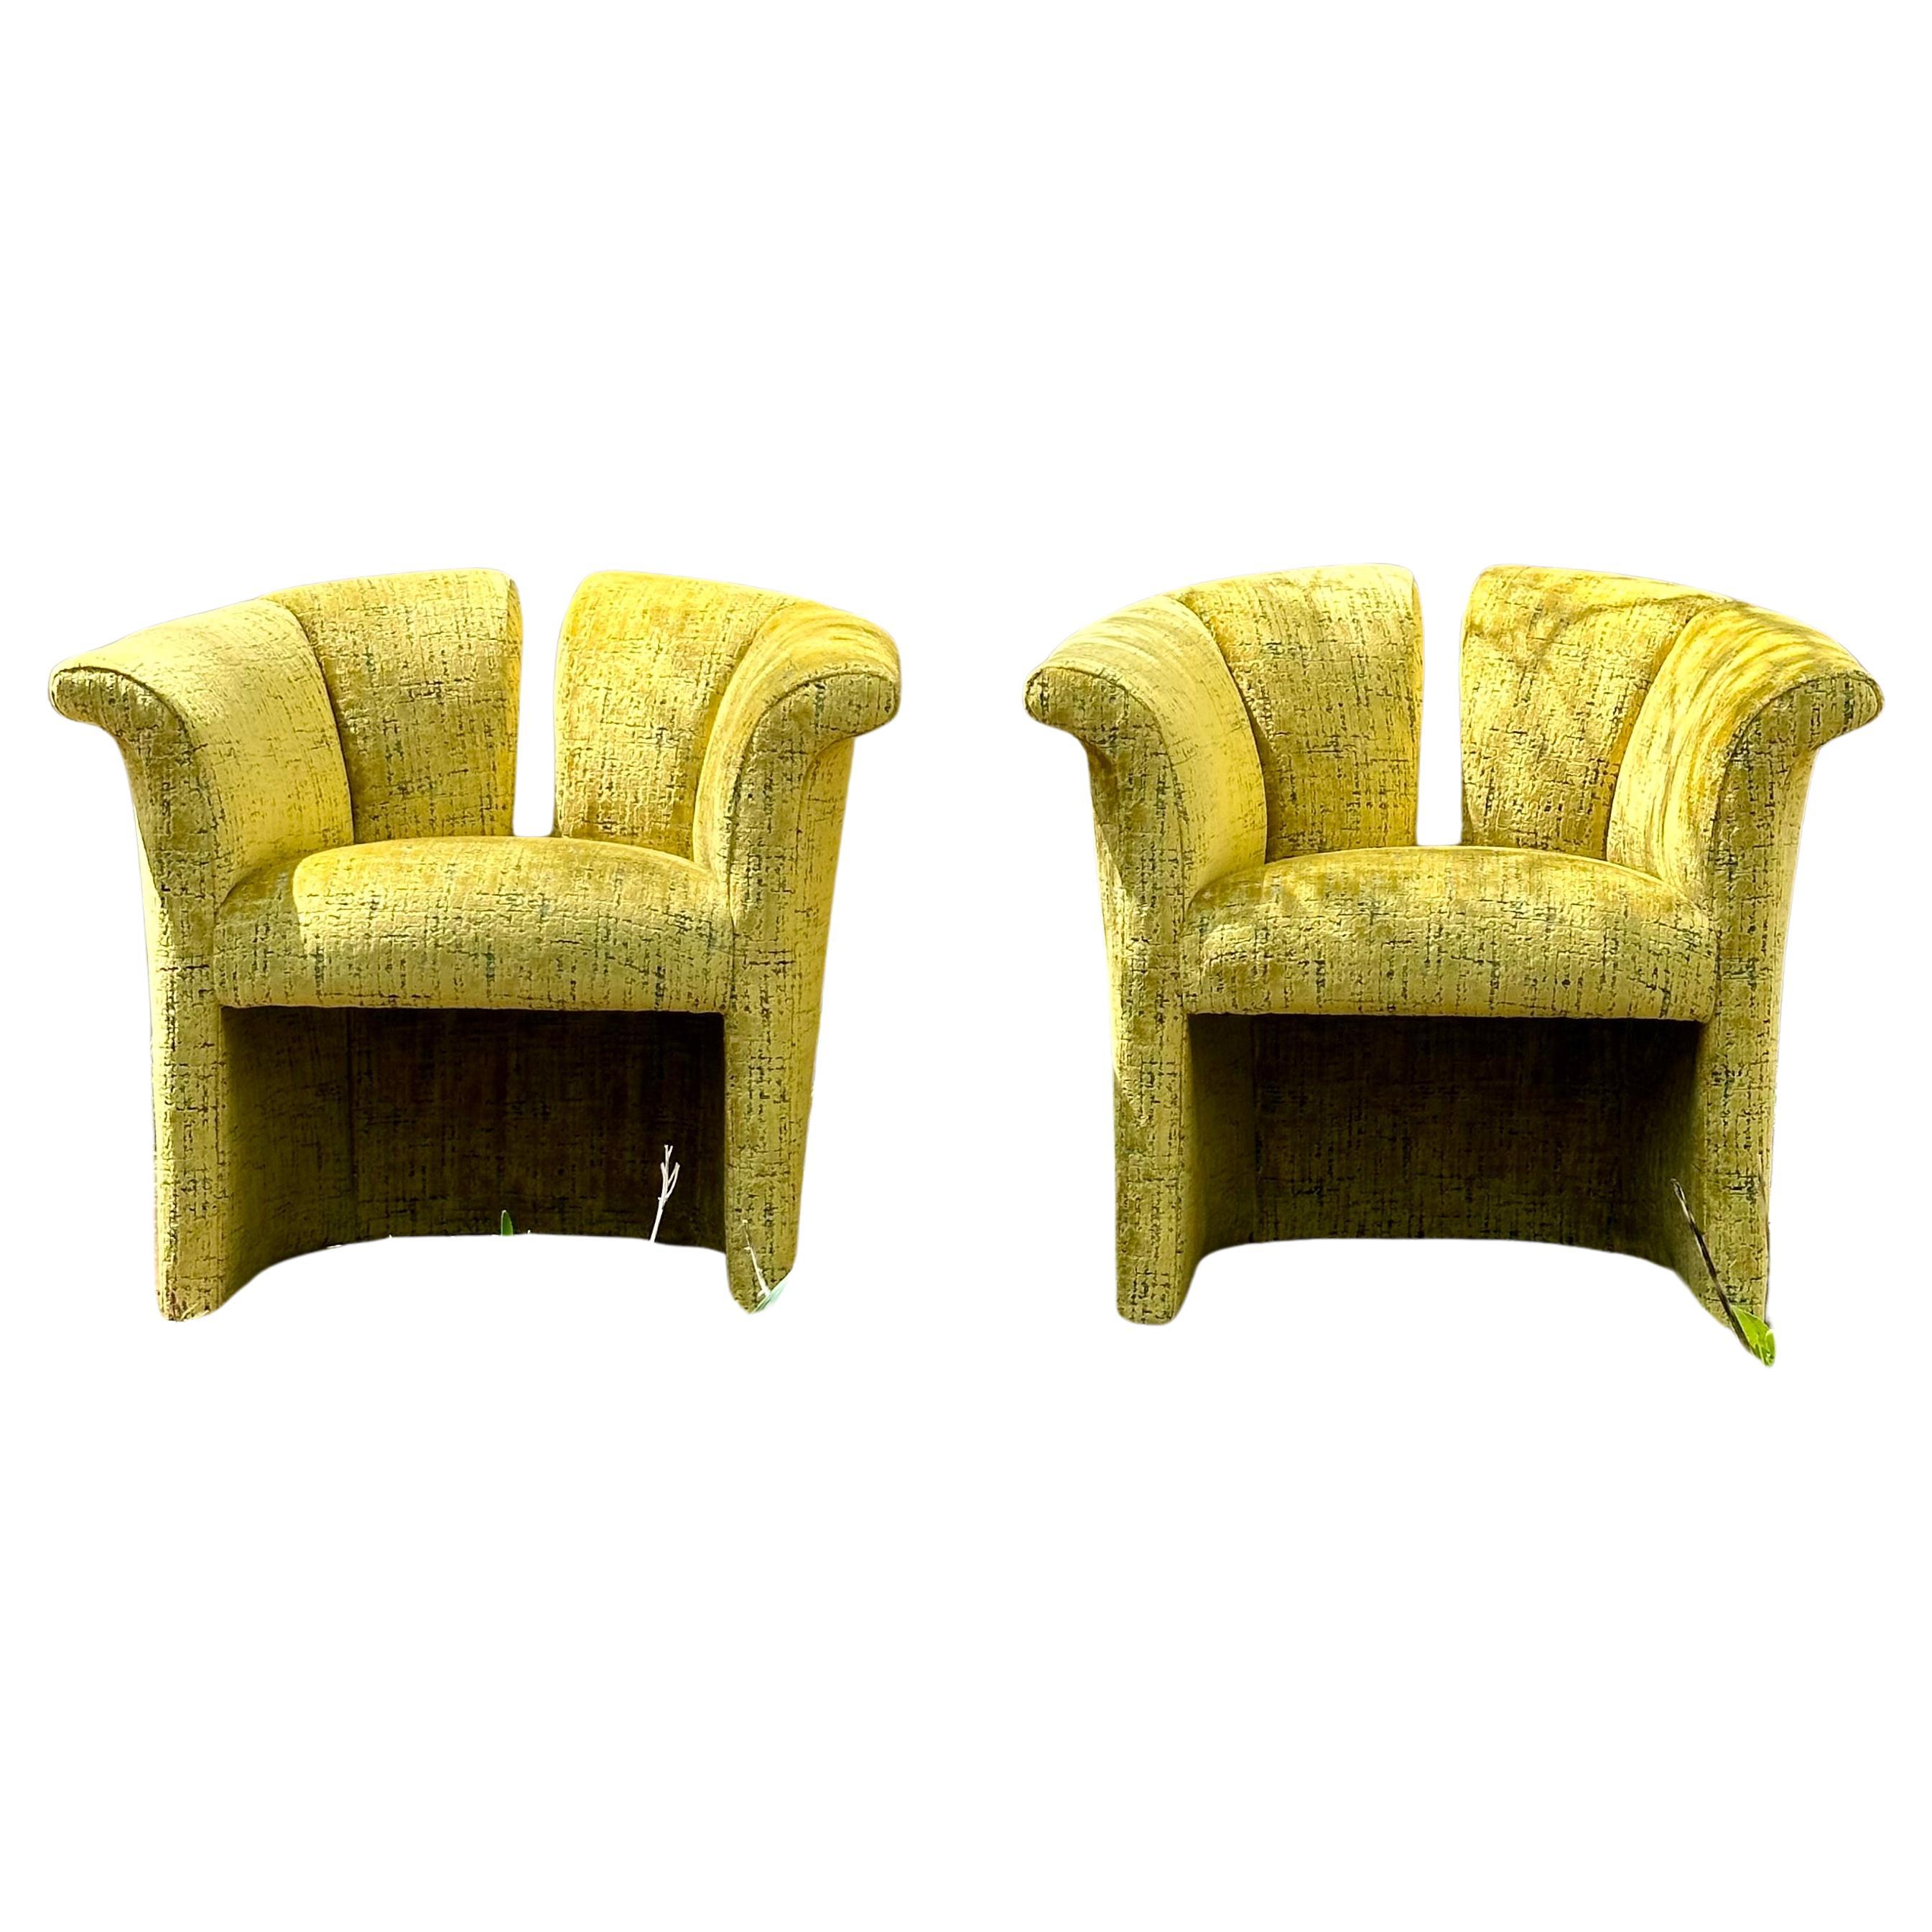 Pair of Split Back Chairs by Milo Baughman for Thayer Coggin For Sale